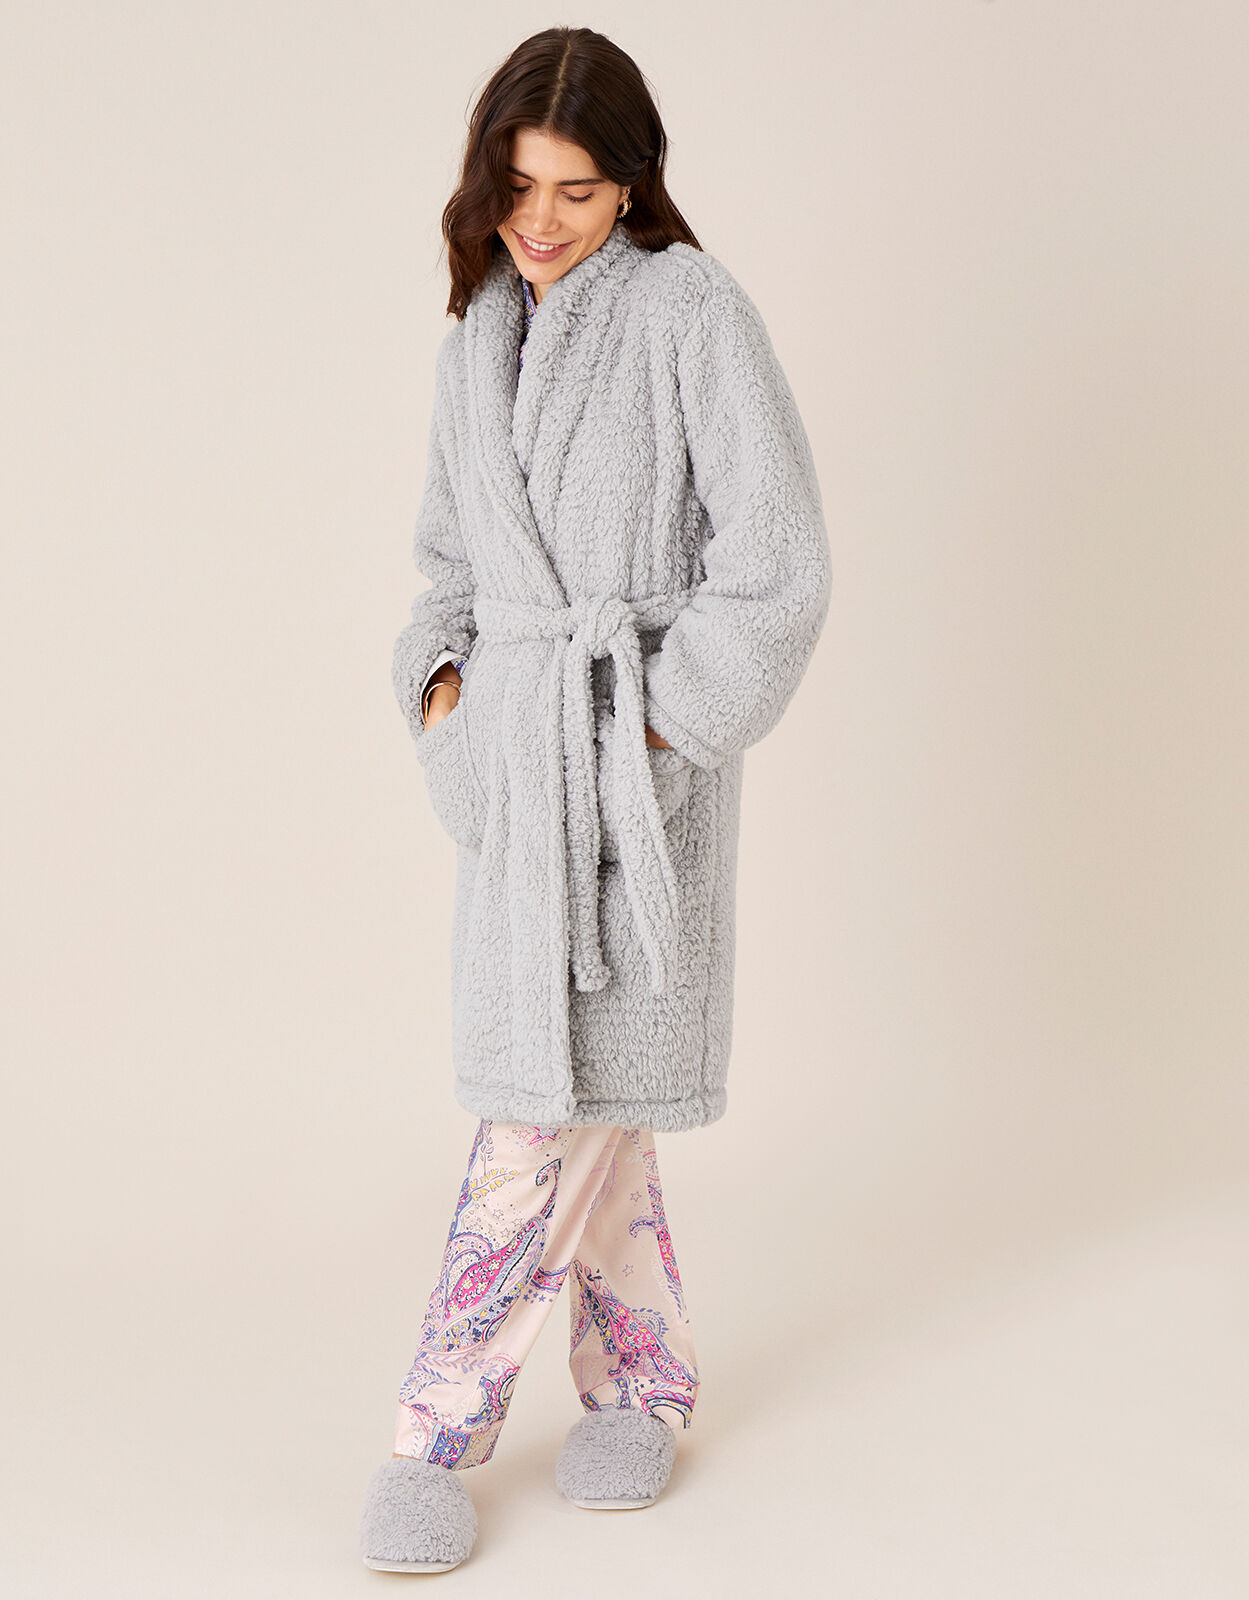 Fluffy dressing gown